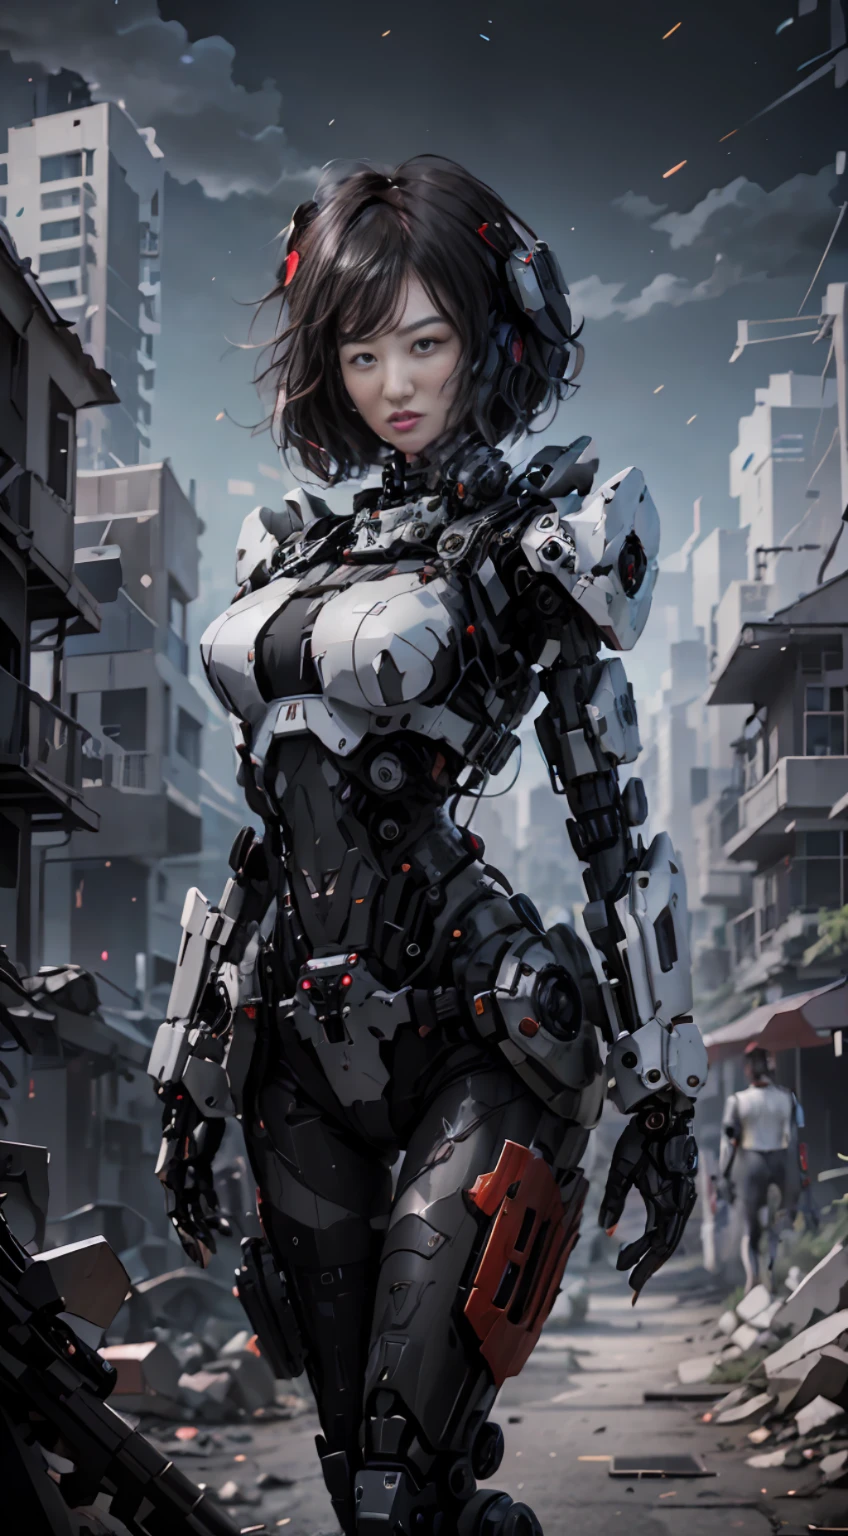 This is a CG Unity 8k wallpaper with ultra-detailed, high-resolution and top quality in cyberpunk style, dominated by black and red. In the picture, a beautiful girl with white messy short hair, a delicate face, standing on the ruins, behind her is a huge robot, and the action of a woman holding a heavy sniper rifle in her hand,